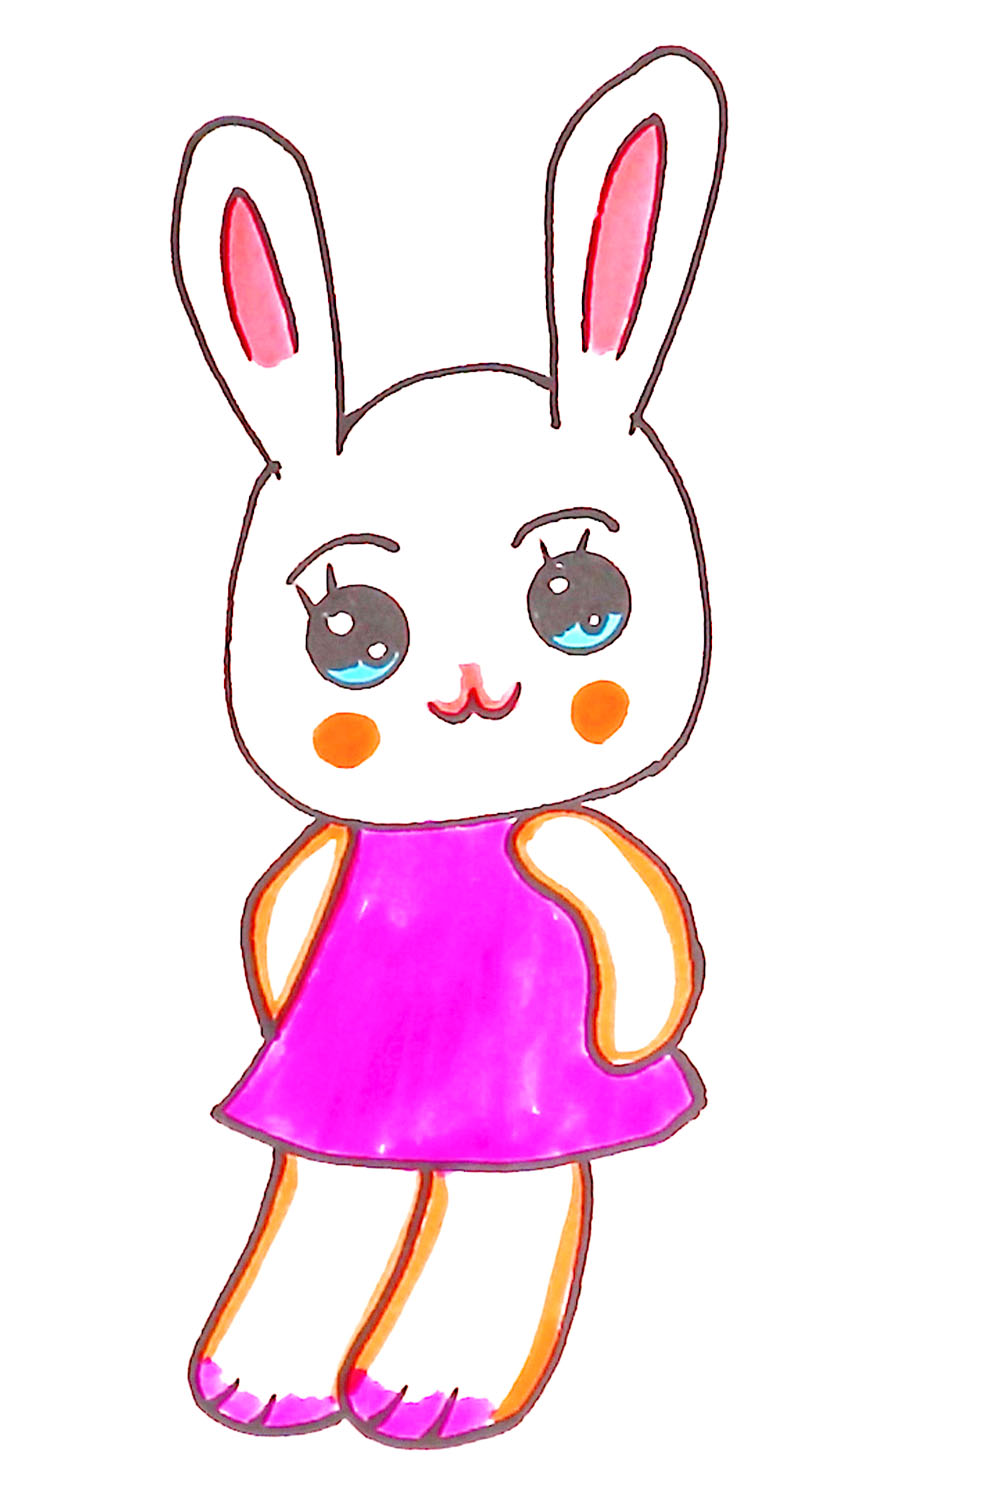 How to draw and color a rabbit